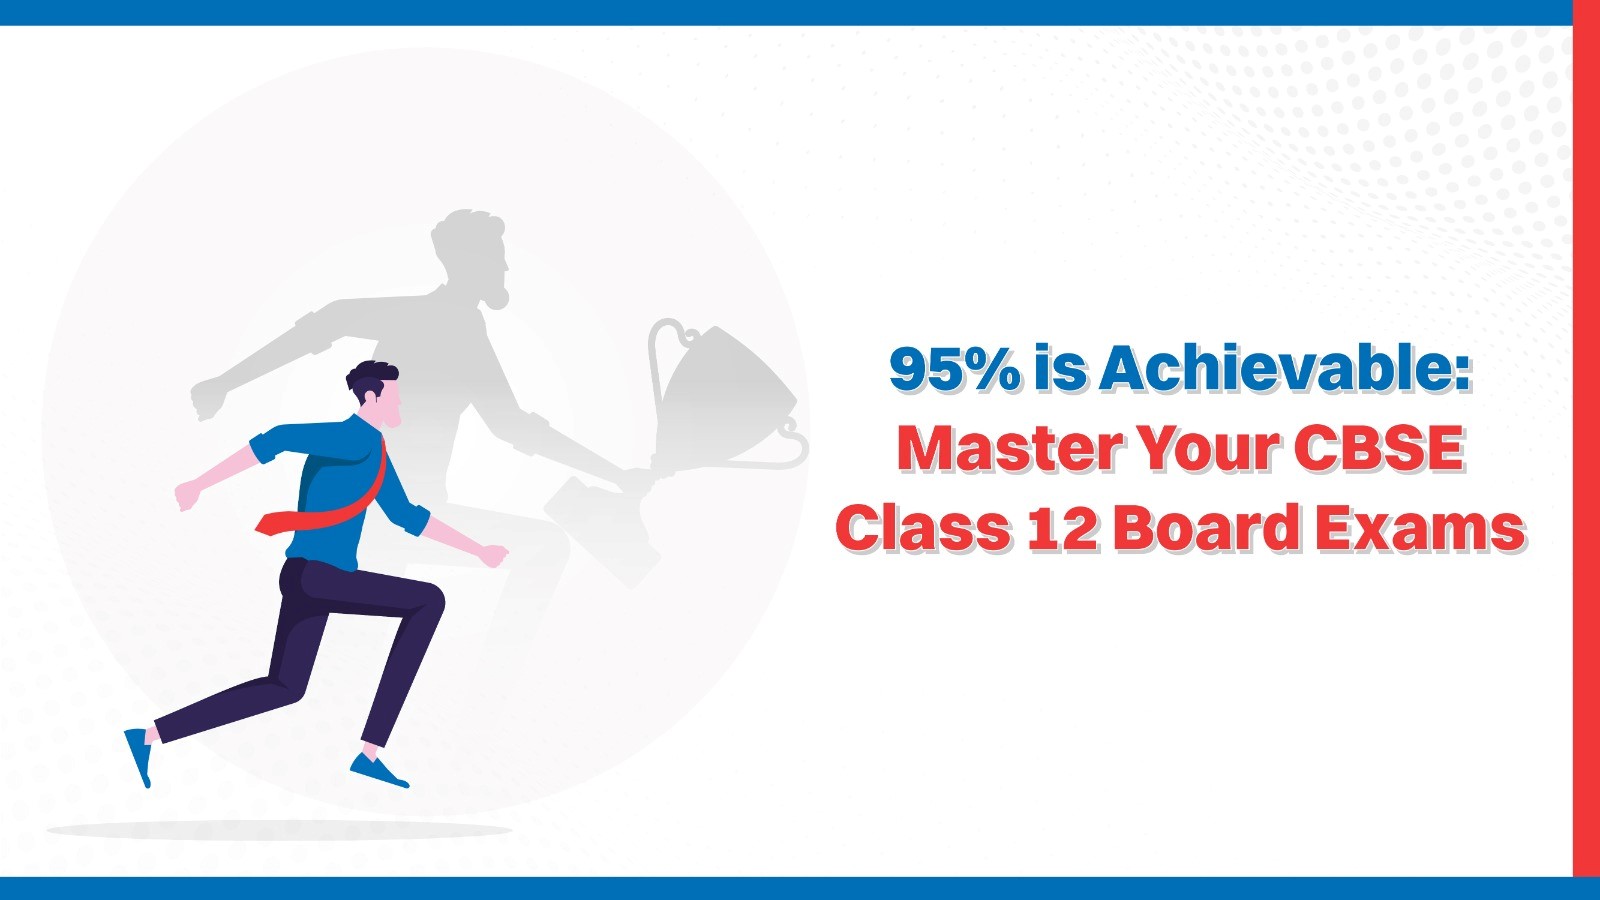 95 is Achievable Master Your CBSE Class 12 Board Exams.jpg